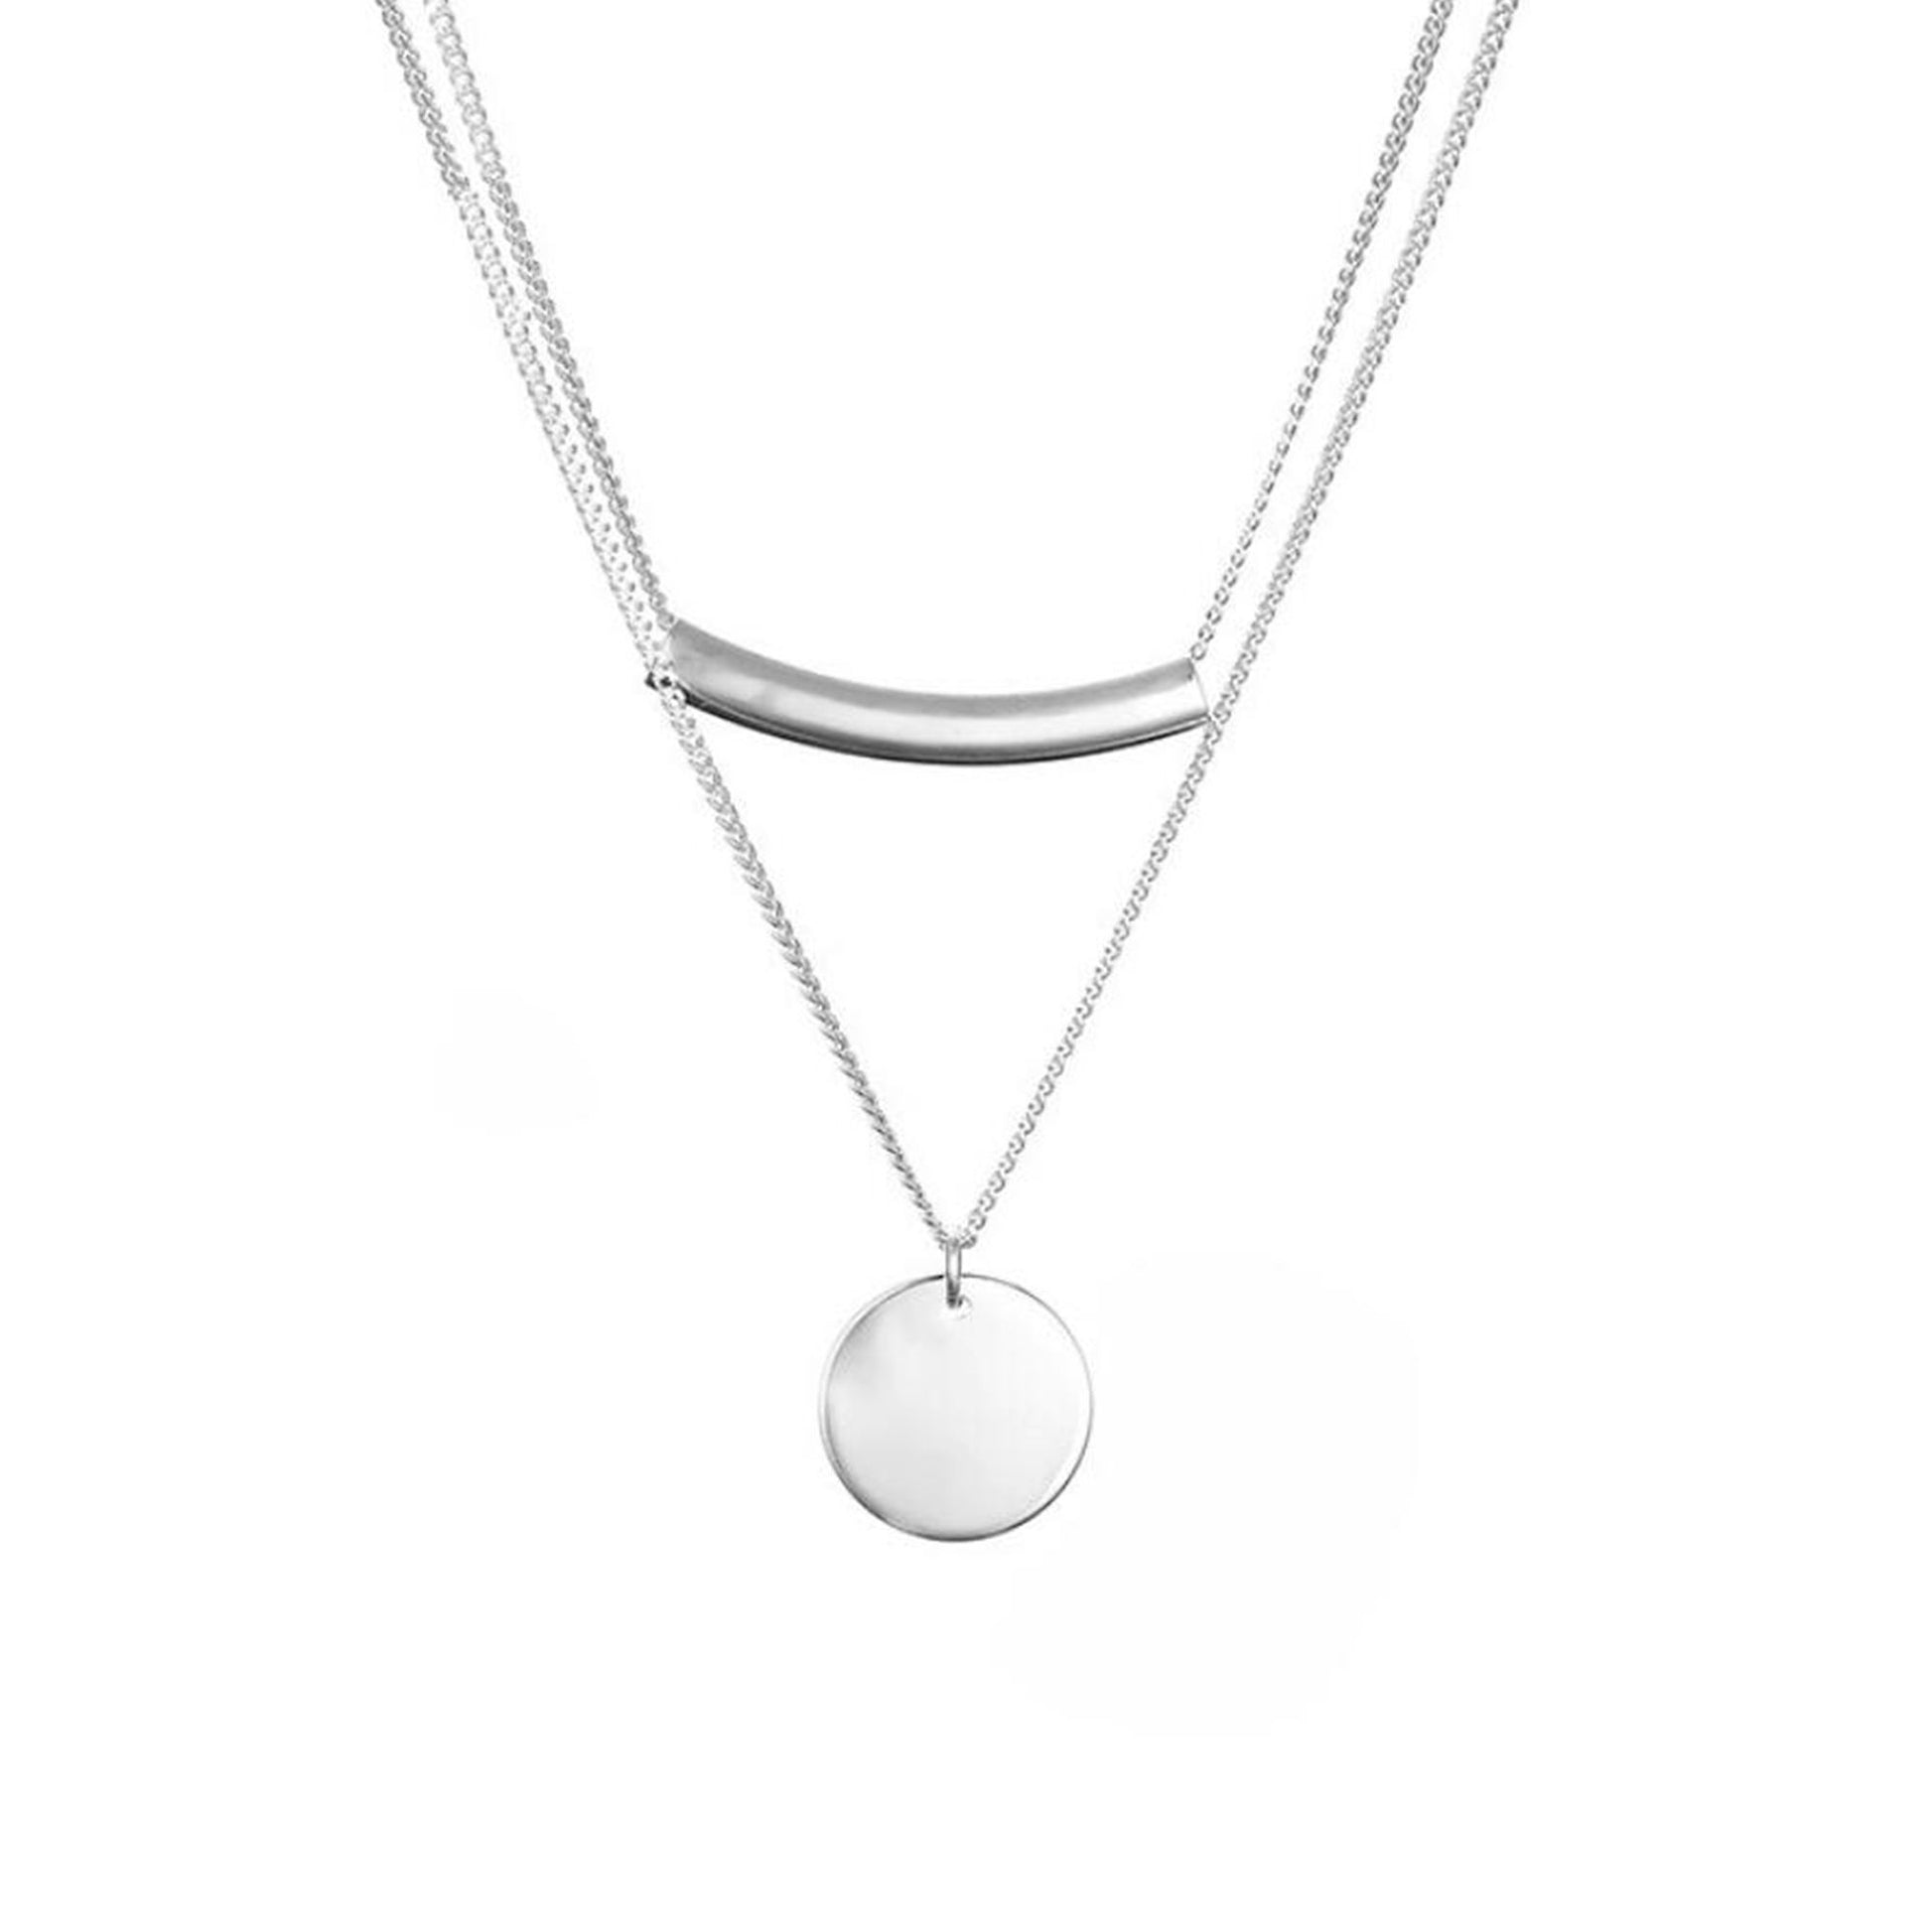 Double Layered Disc Necklace with Sterling Silver Pebble Charm and Curb Chain - sugarkittenlondon